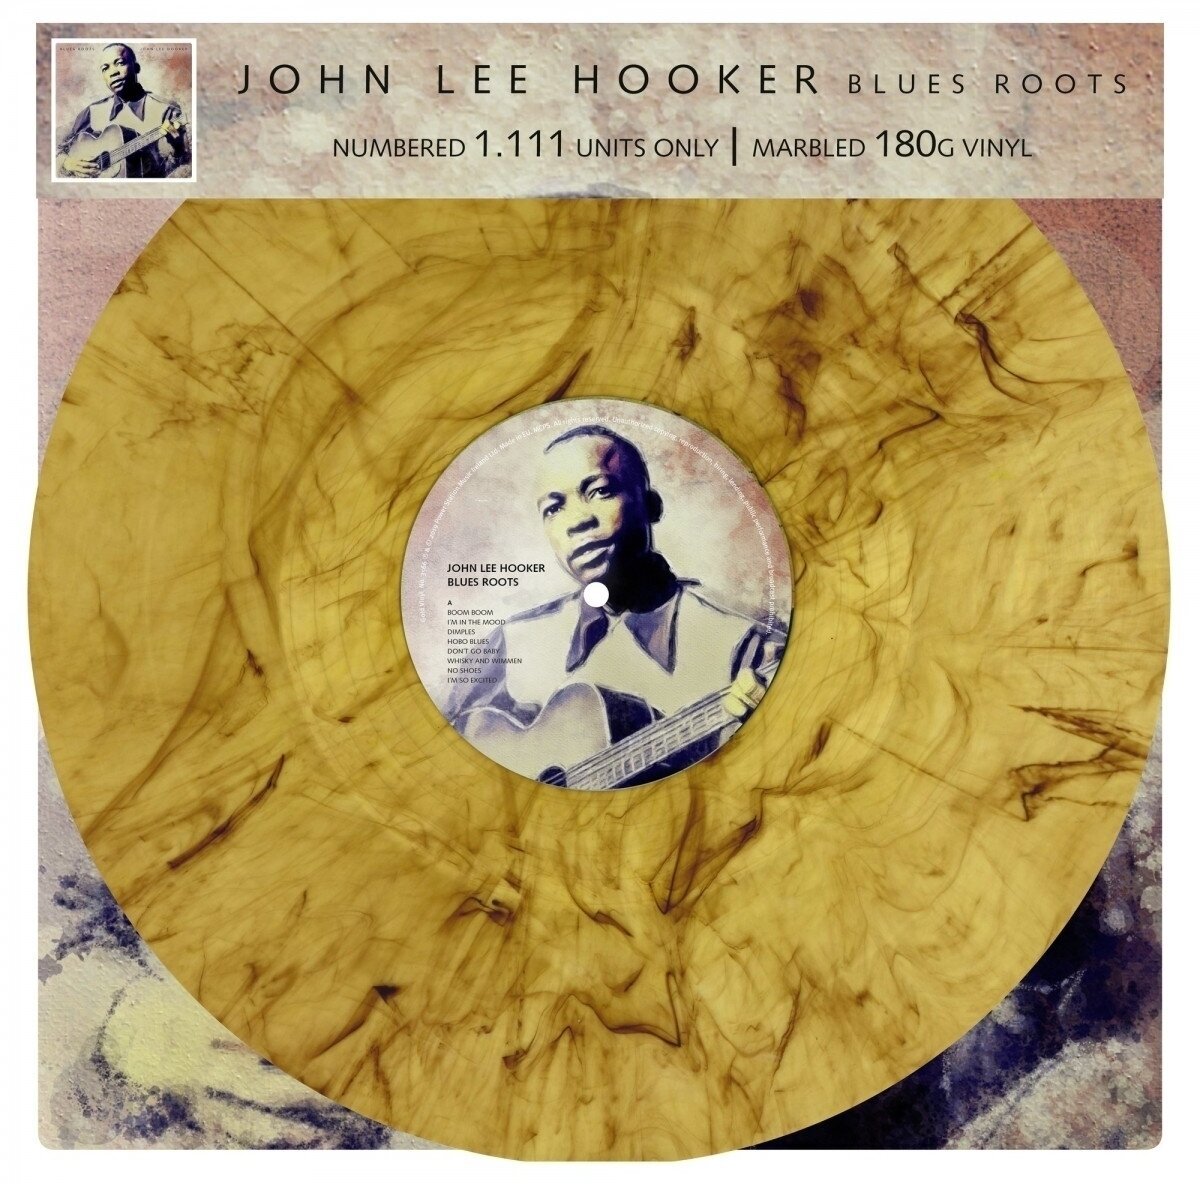 Vinylplade John Lee Hooker - Blues Roots (Limited Edition) (Numbered) (Marbled Coloured) (LP)